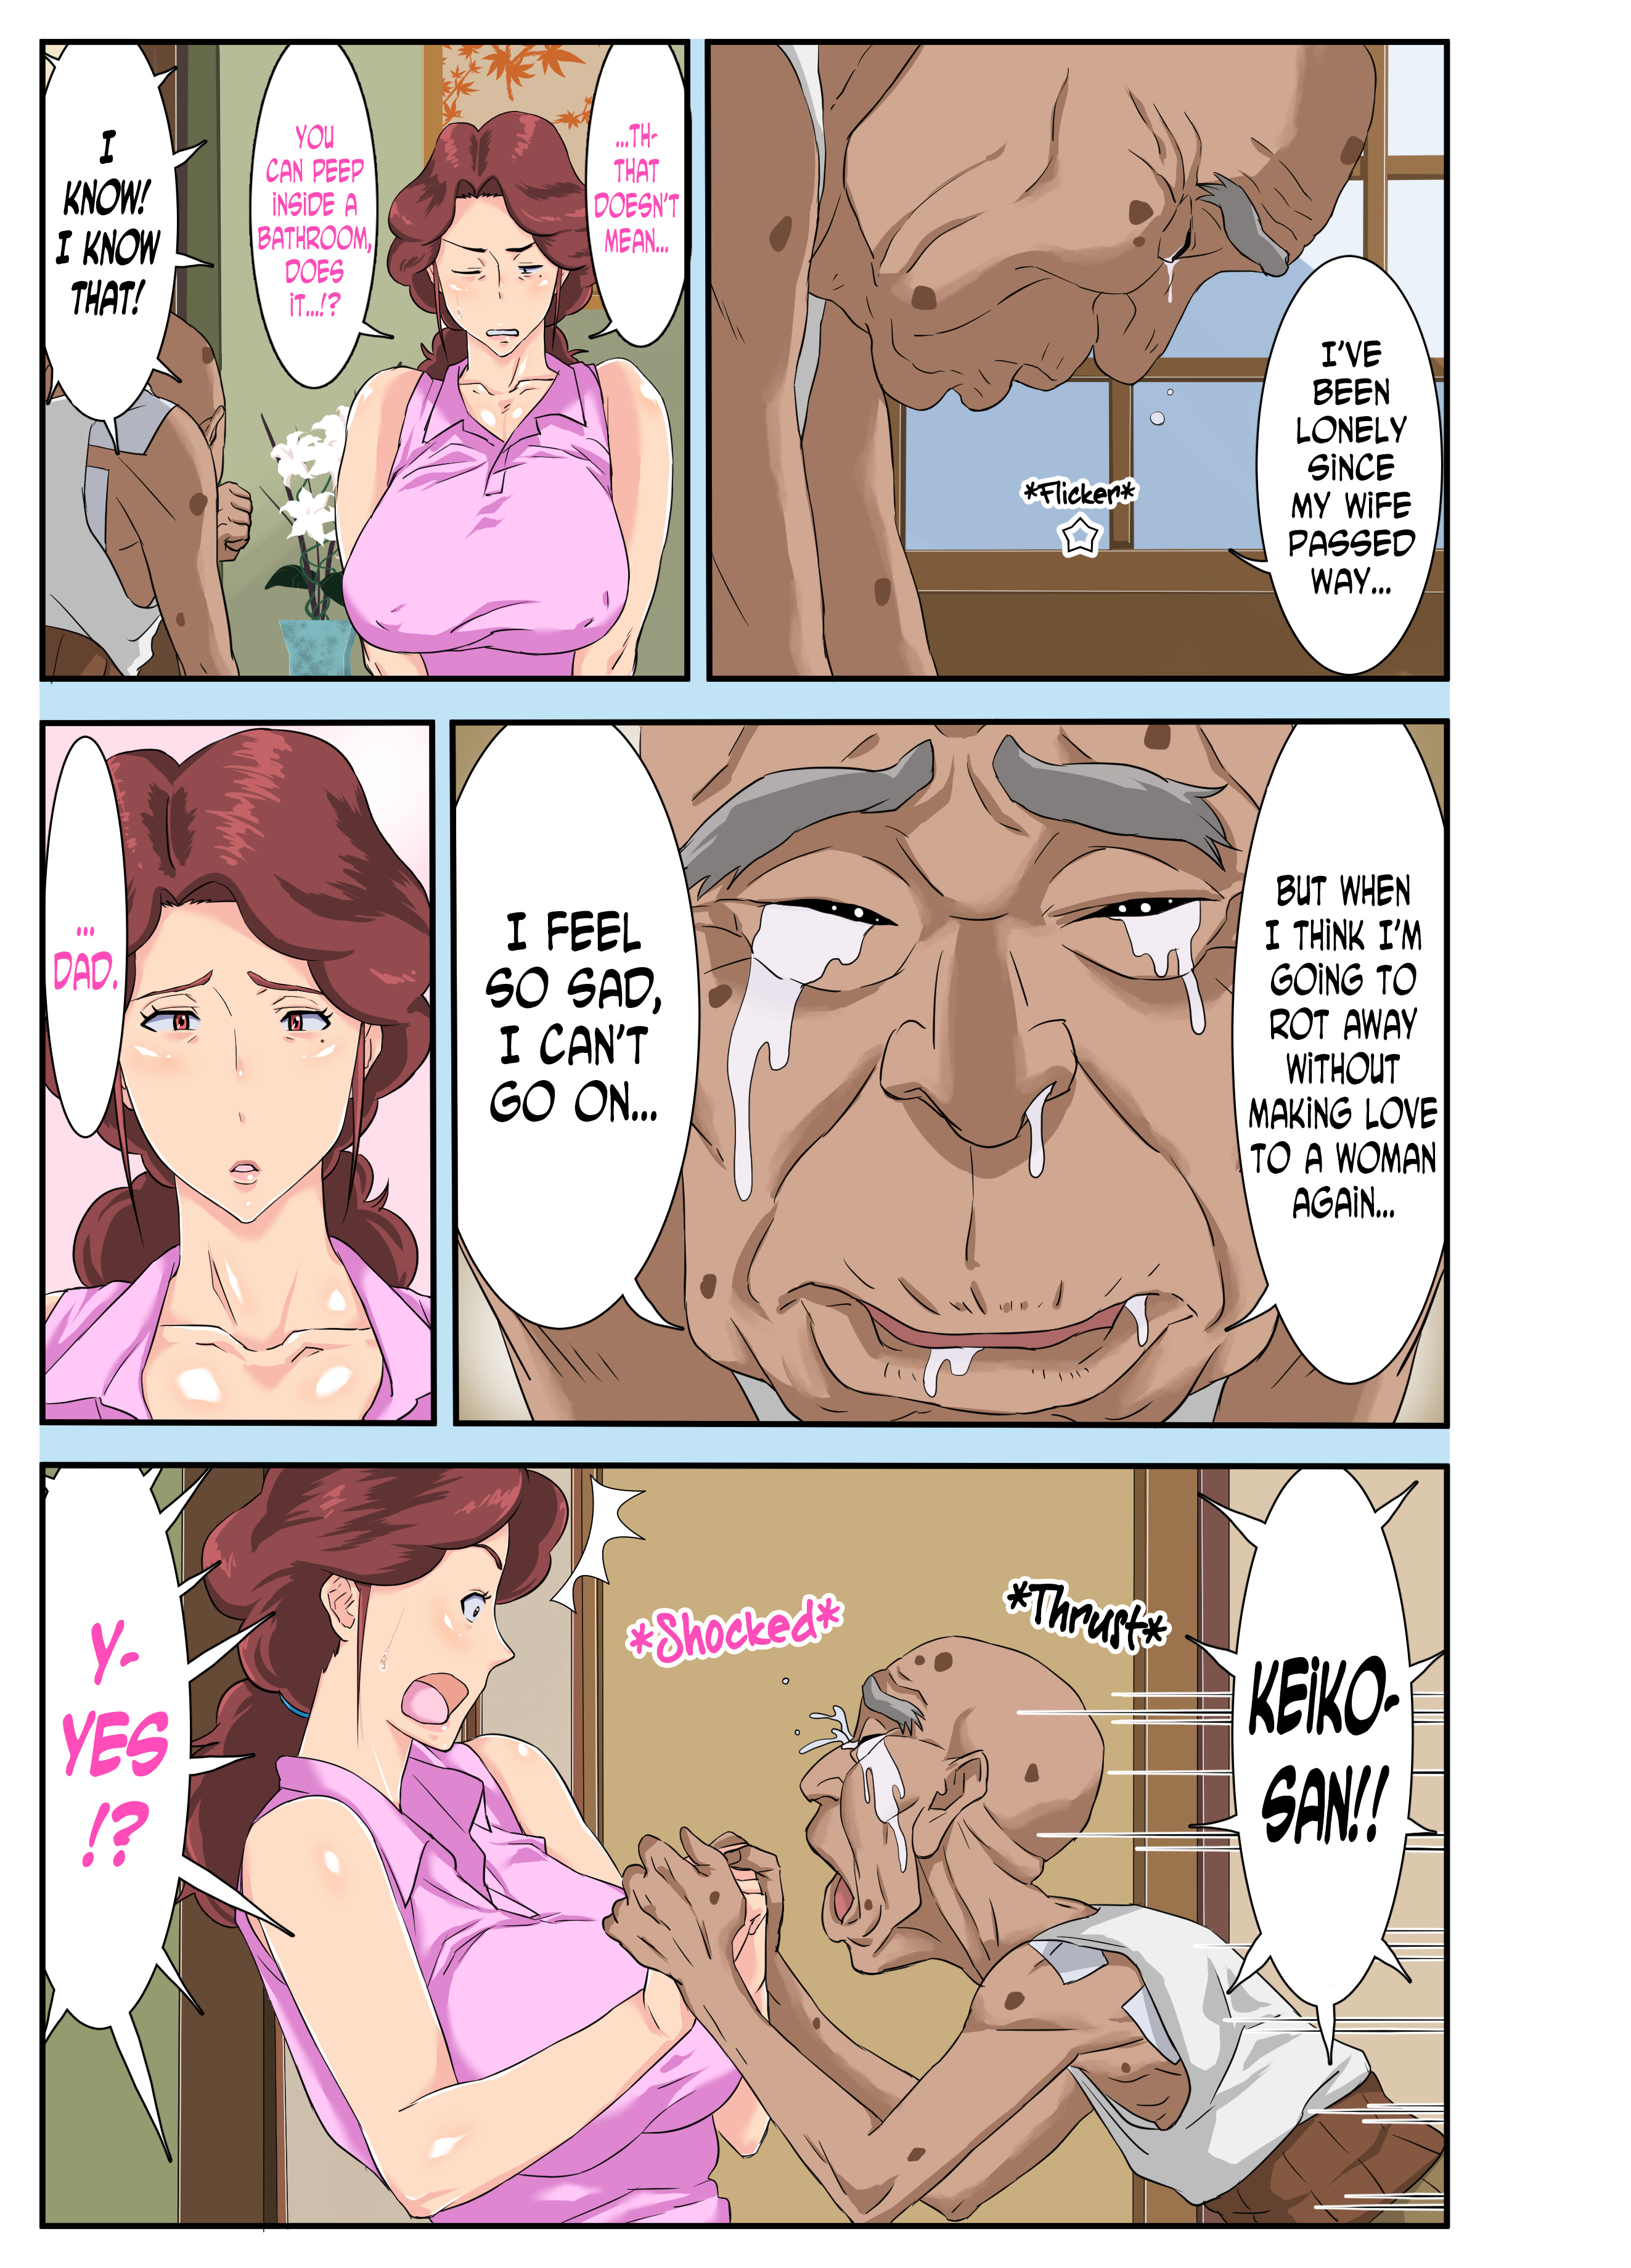 Dirty old man fucks his busty daughter while her husband sleeps - sex comics pic